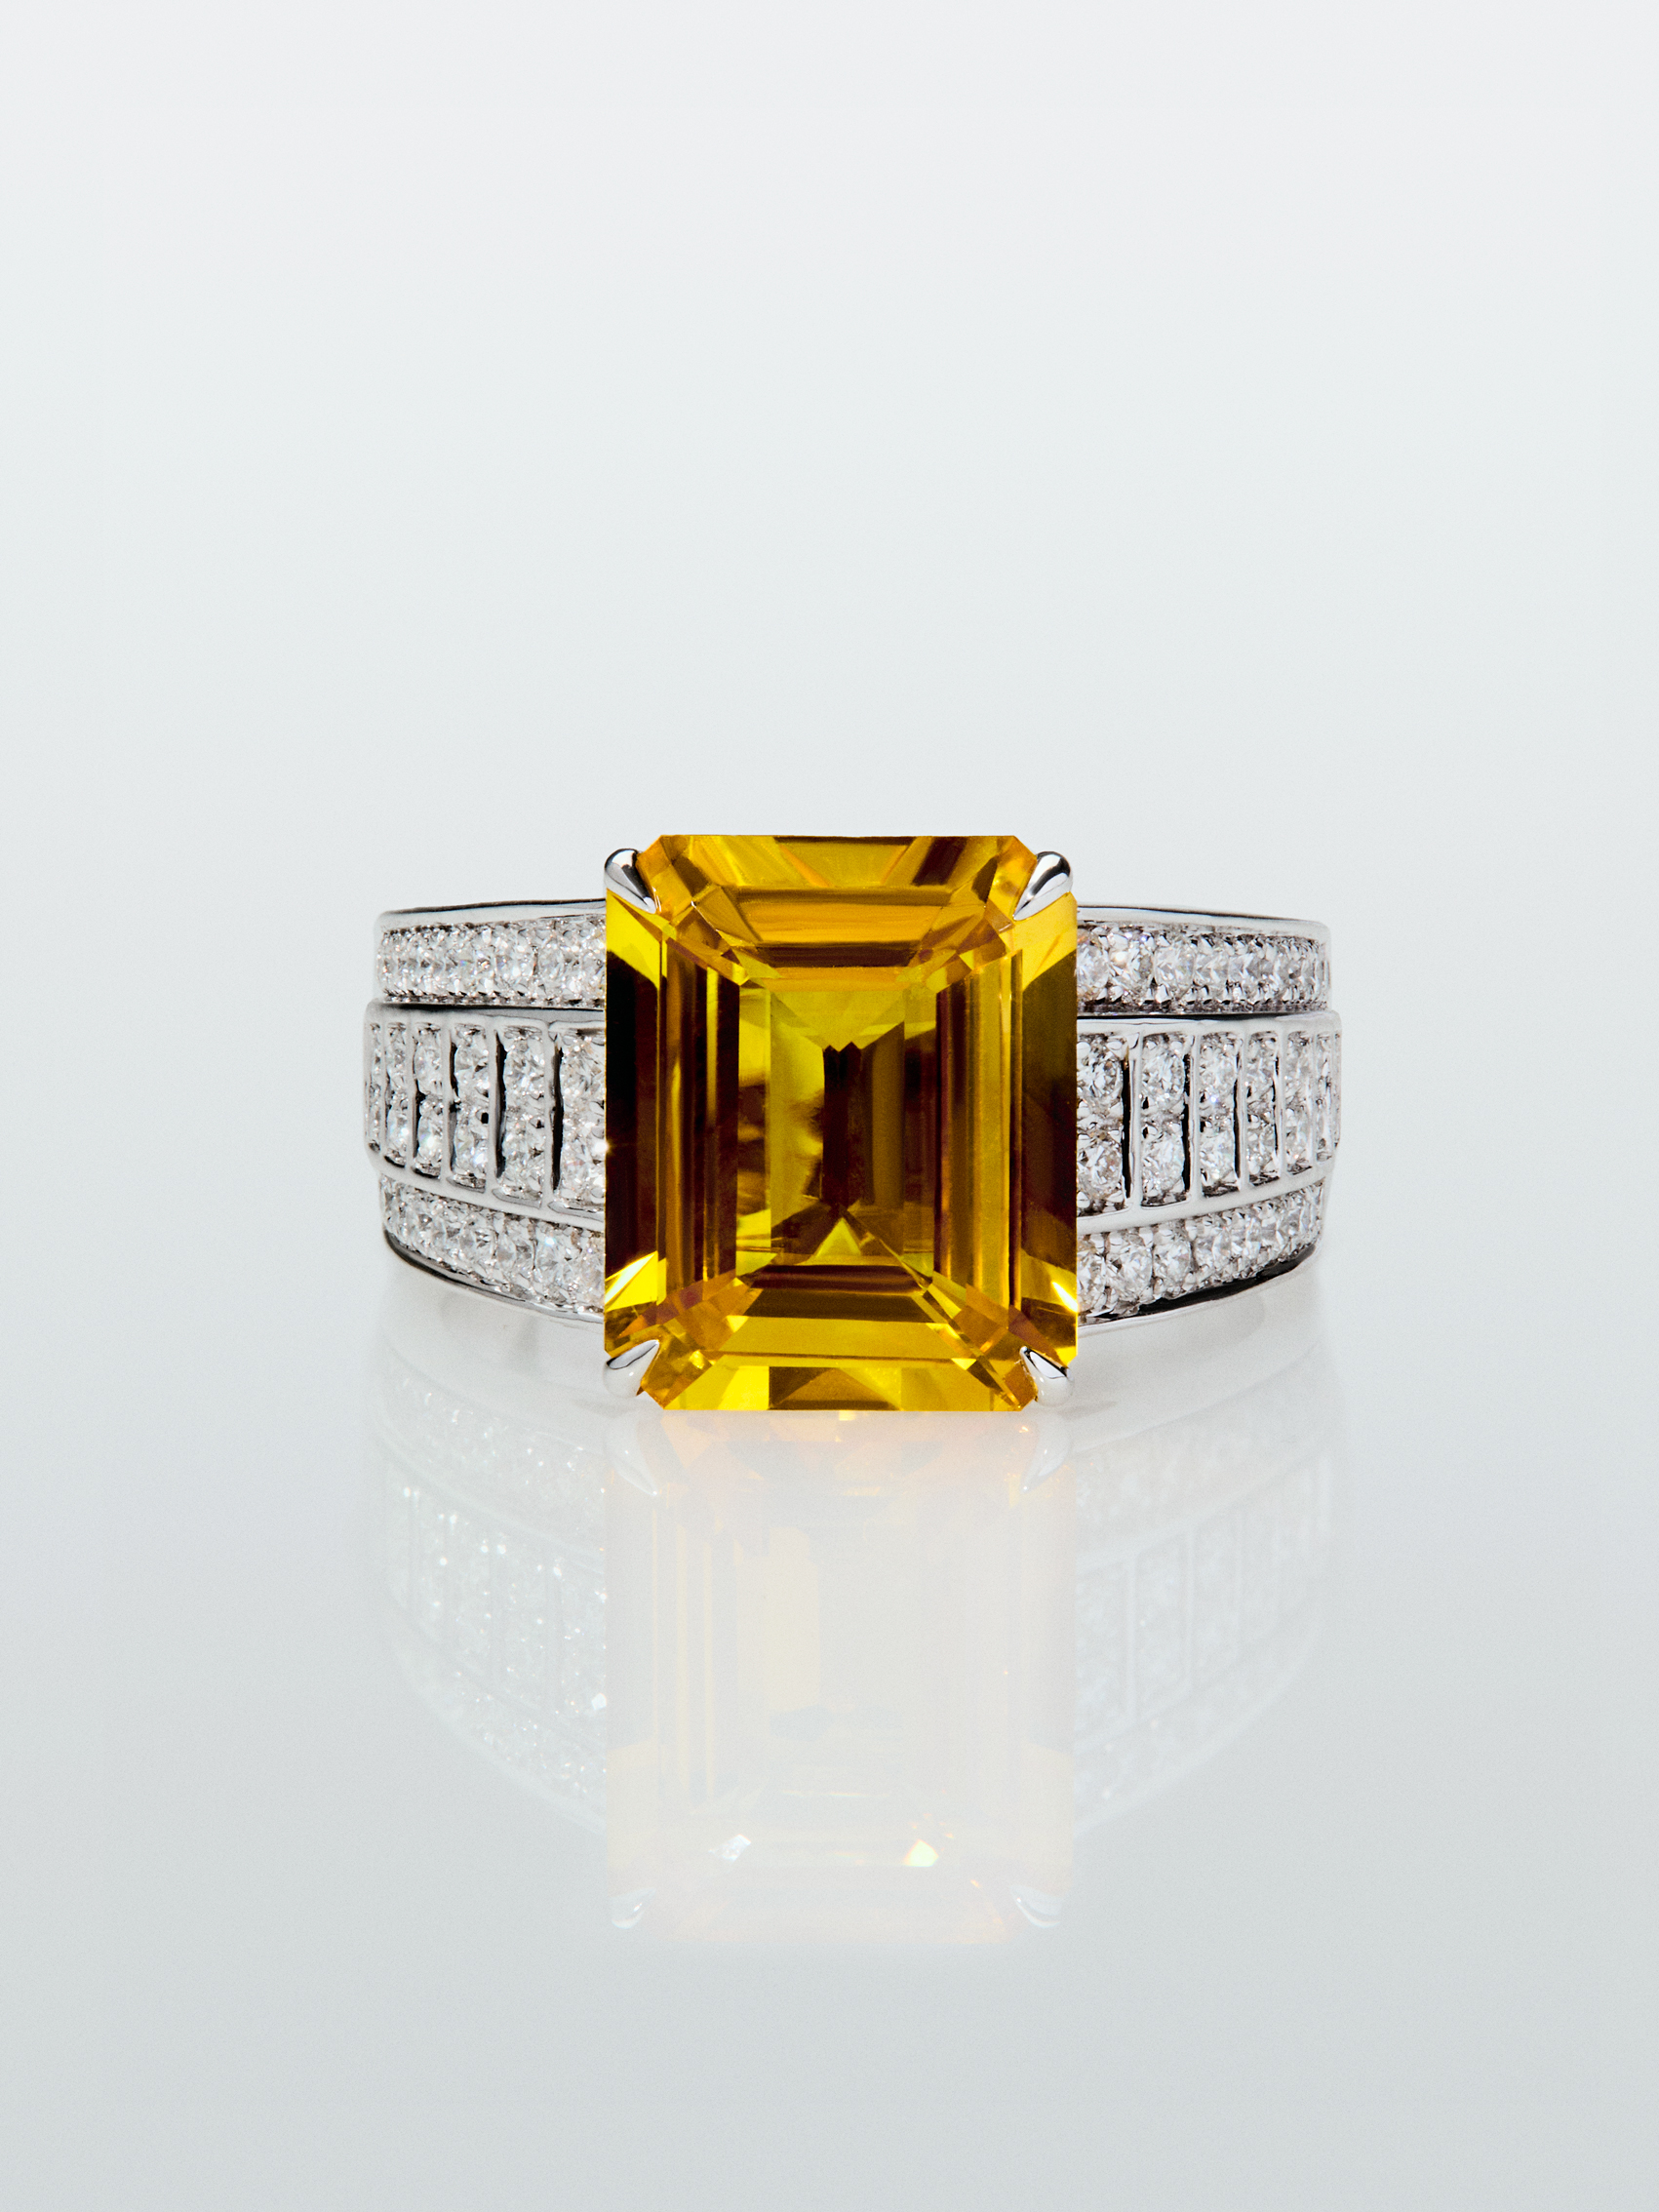 18K white gold ring with octagonal-cut yellow sapphire of 5.548 cts and 70 brilliant-cut diamonds with a total of 0.45 cts